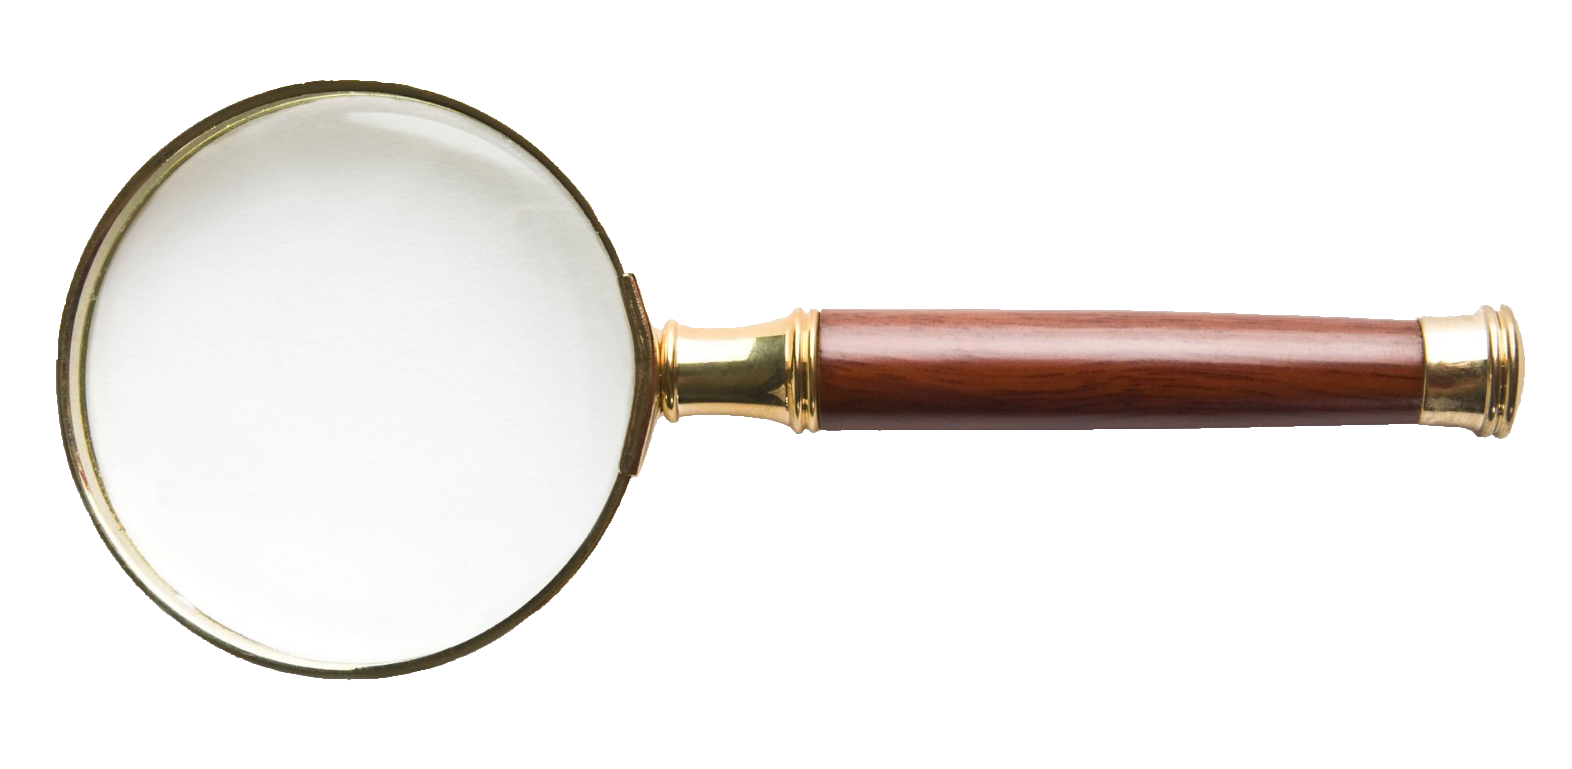 magnifying-glass-8